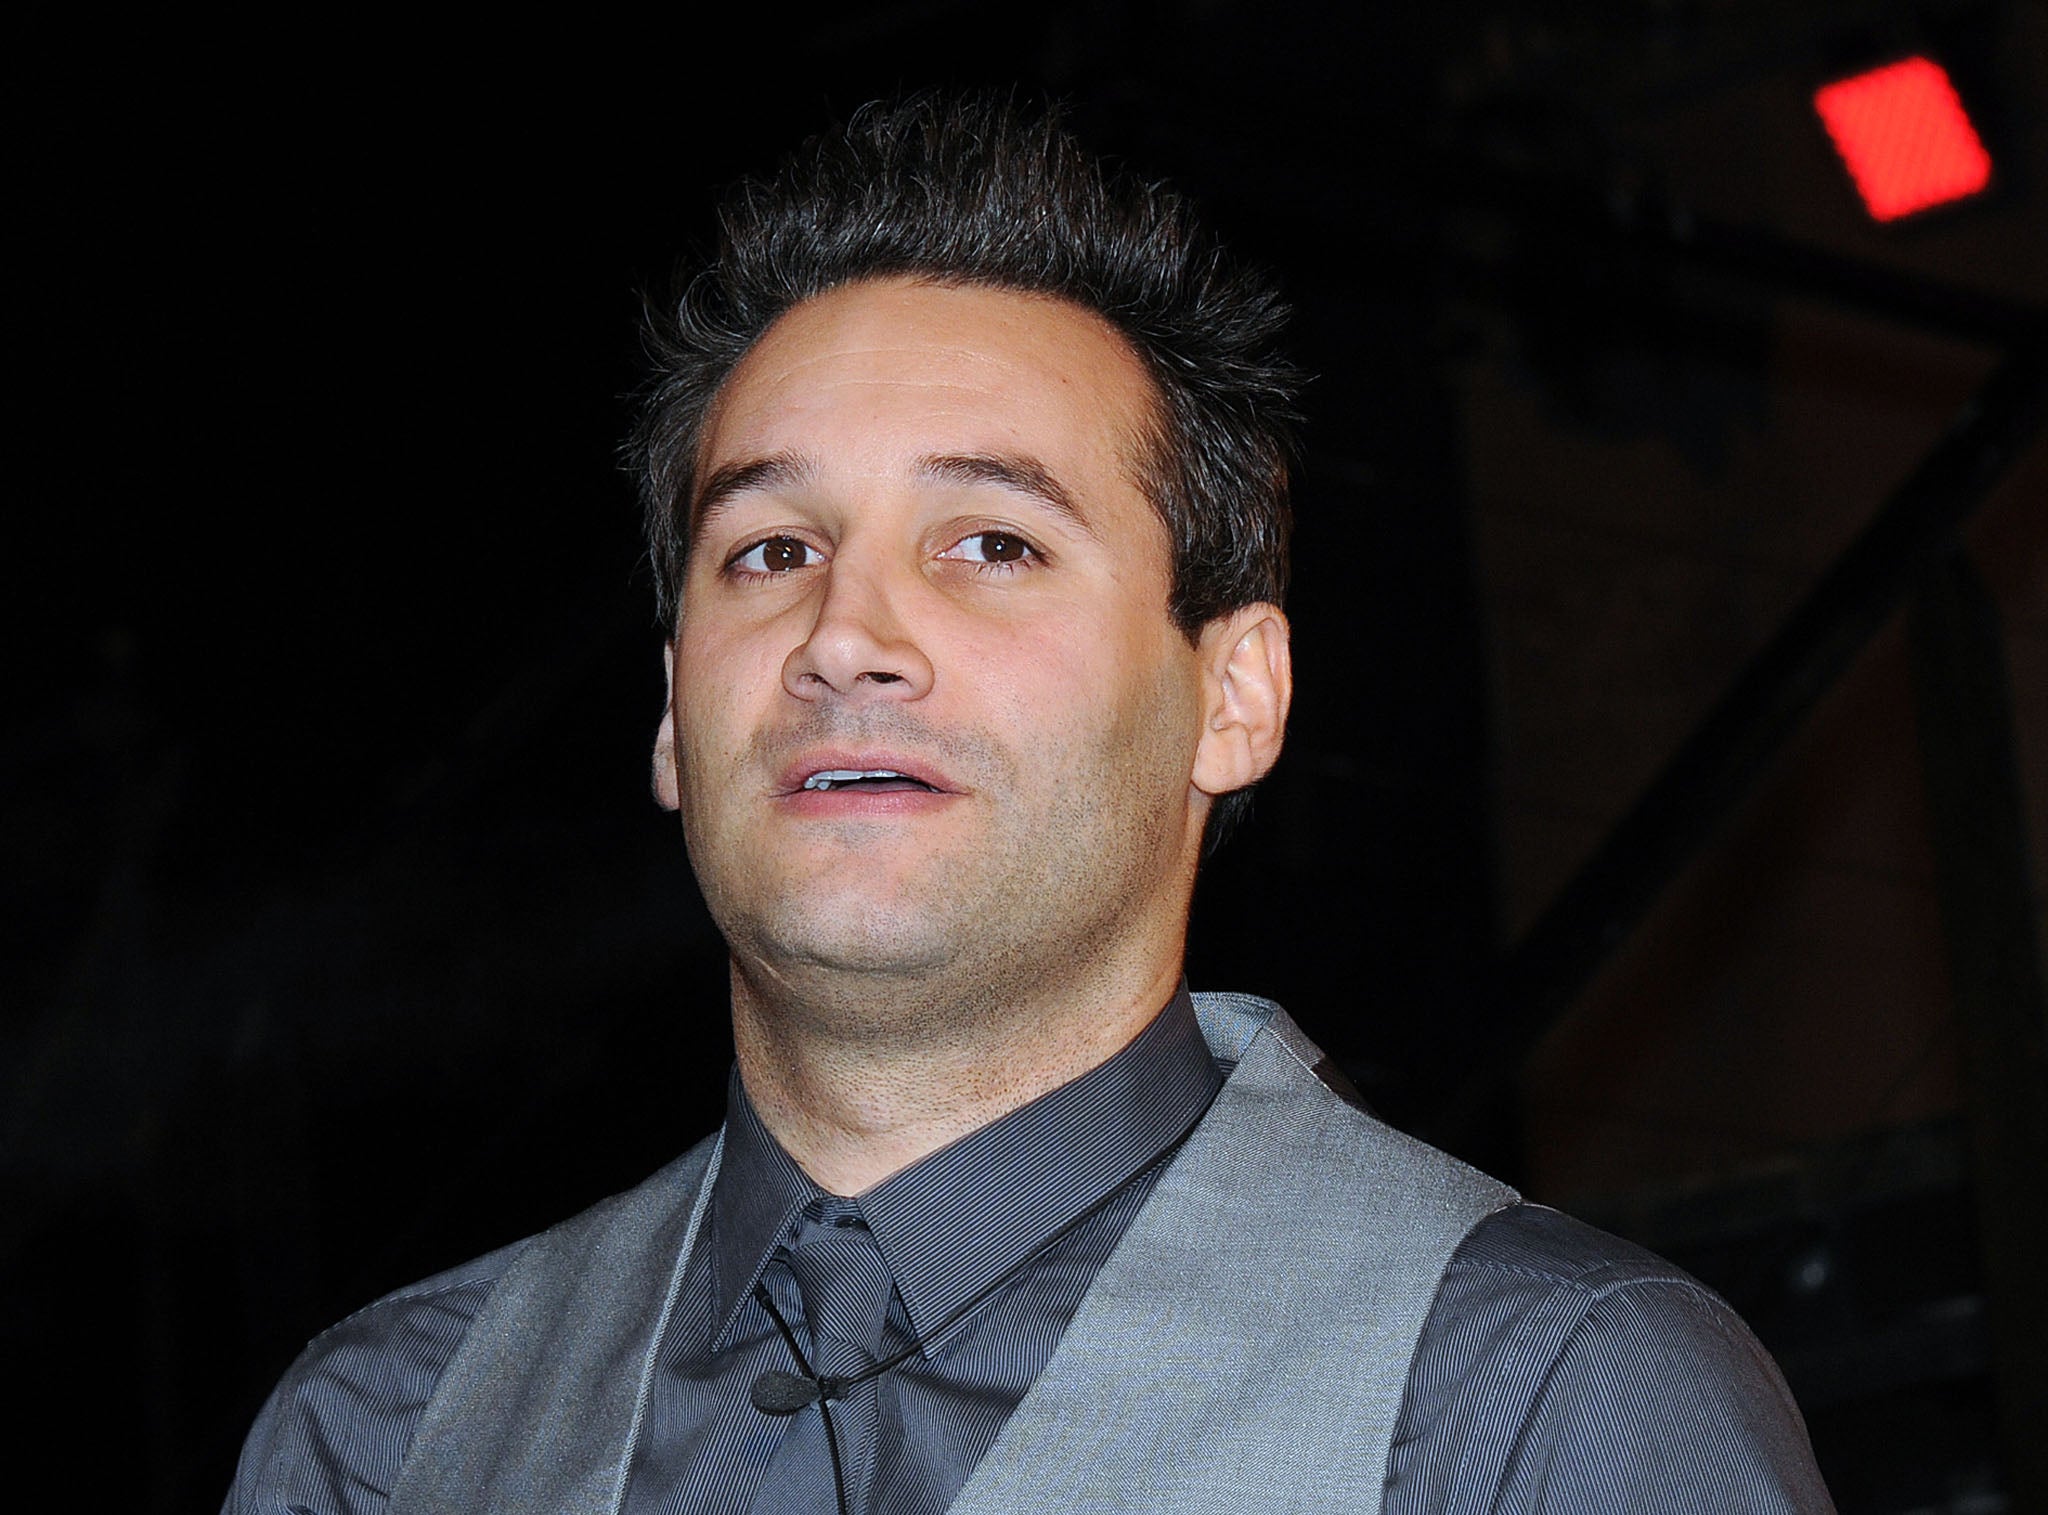 Dane Bowers had been engaged to Sophia Cahill